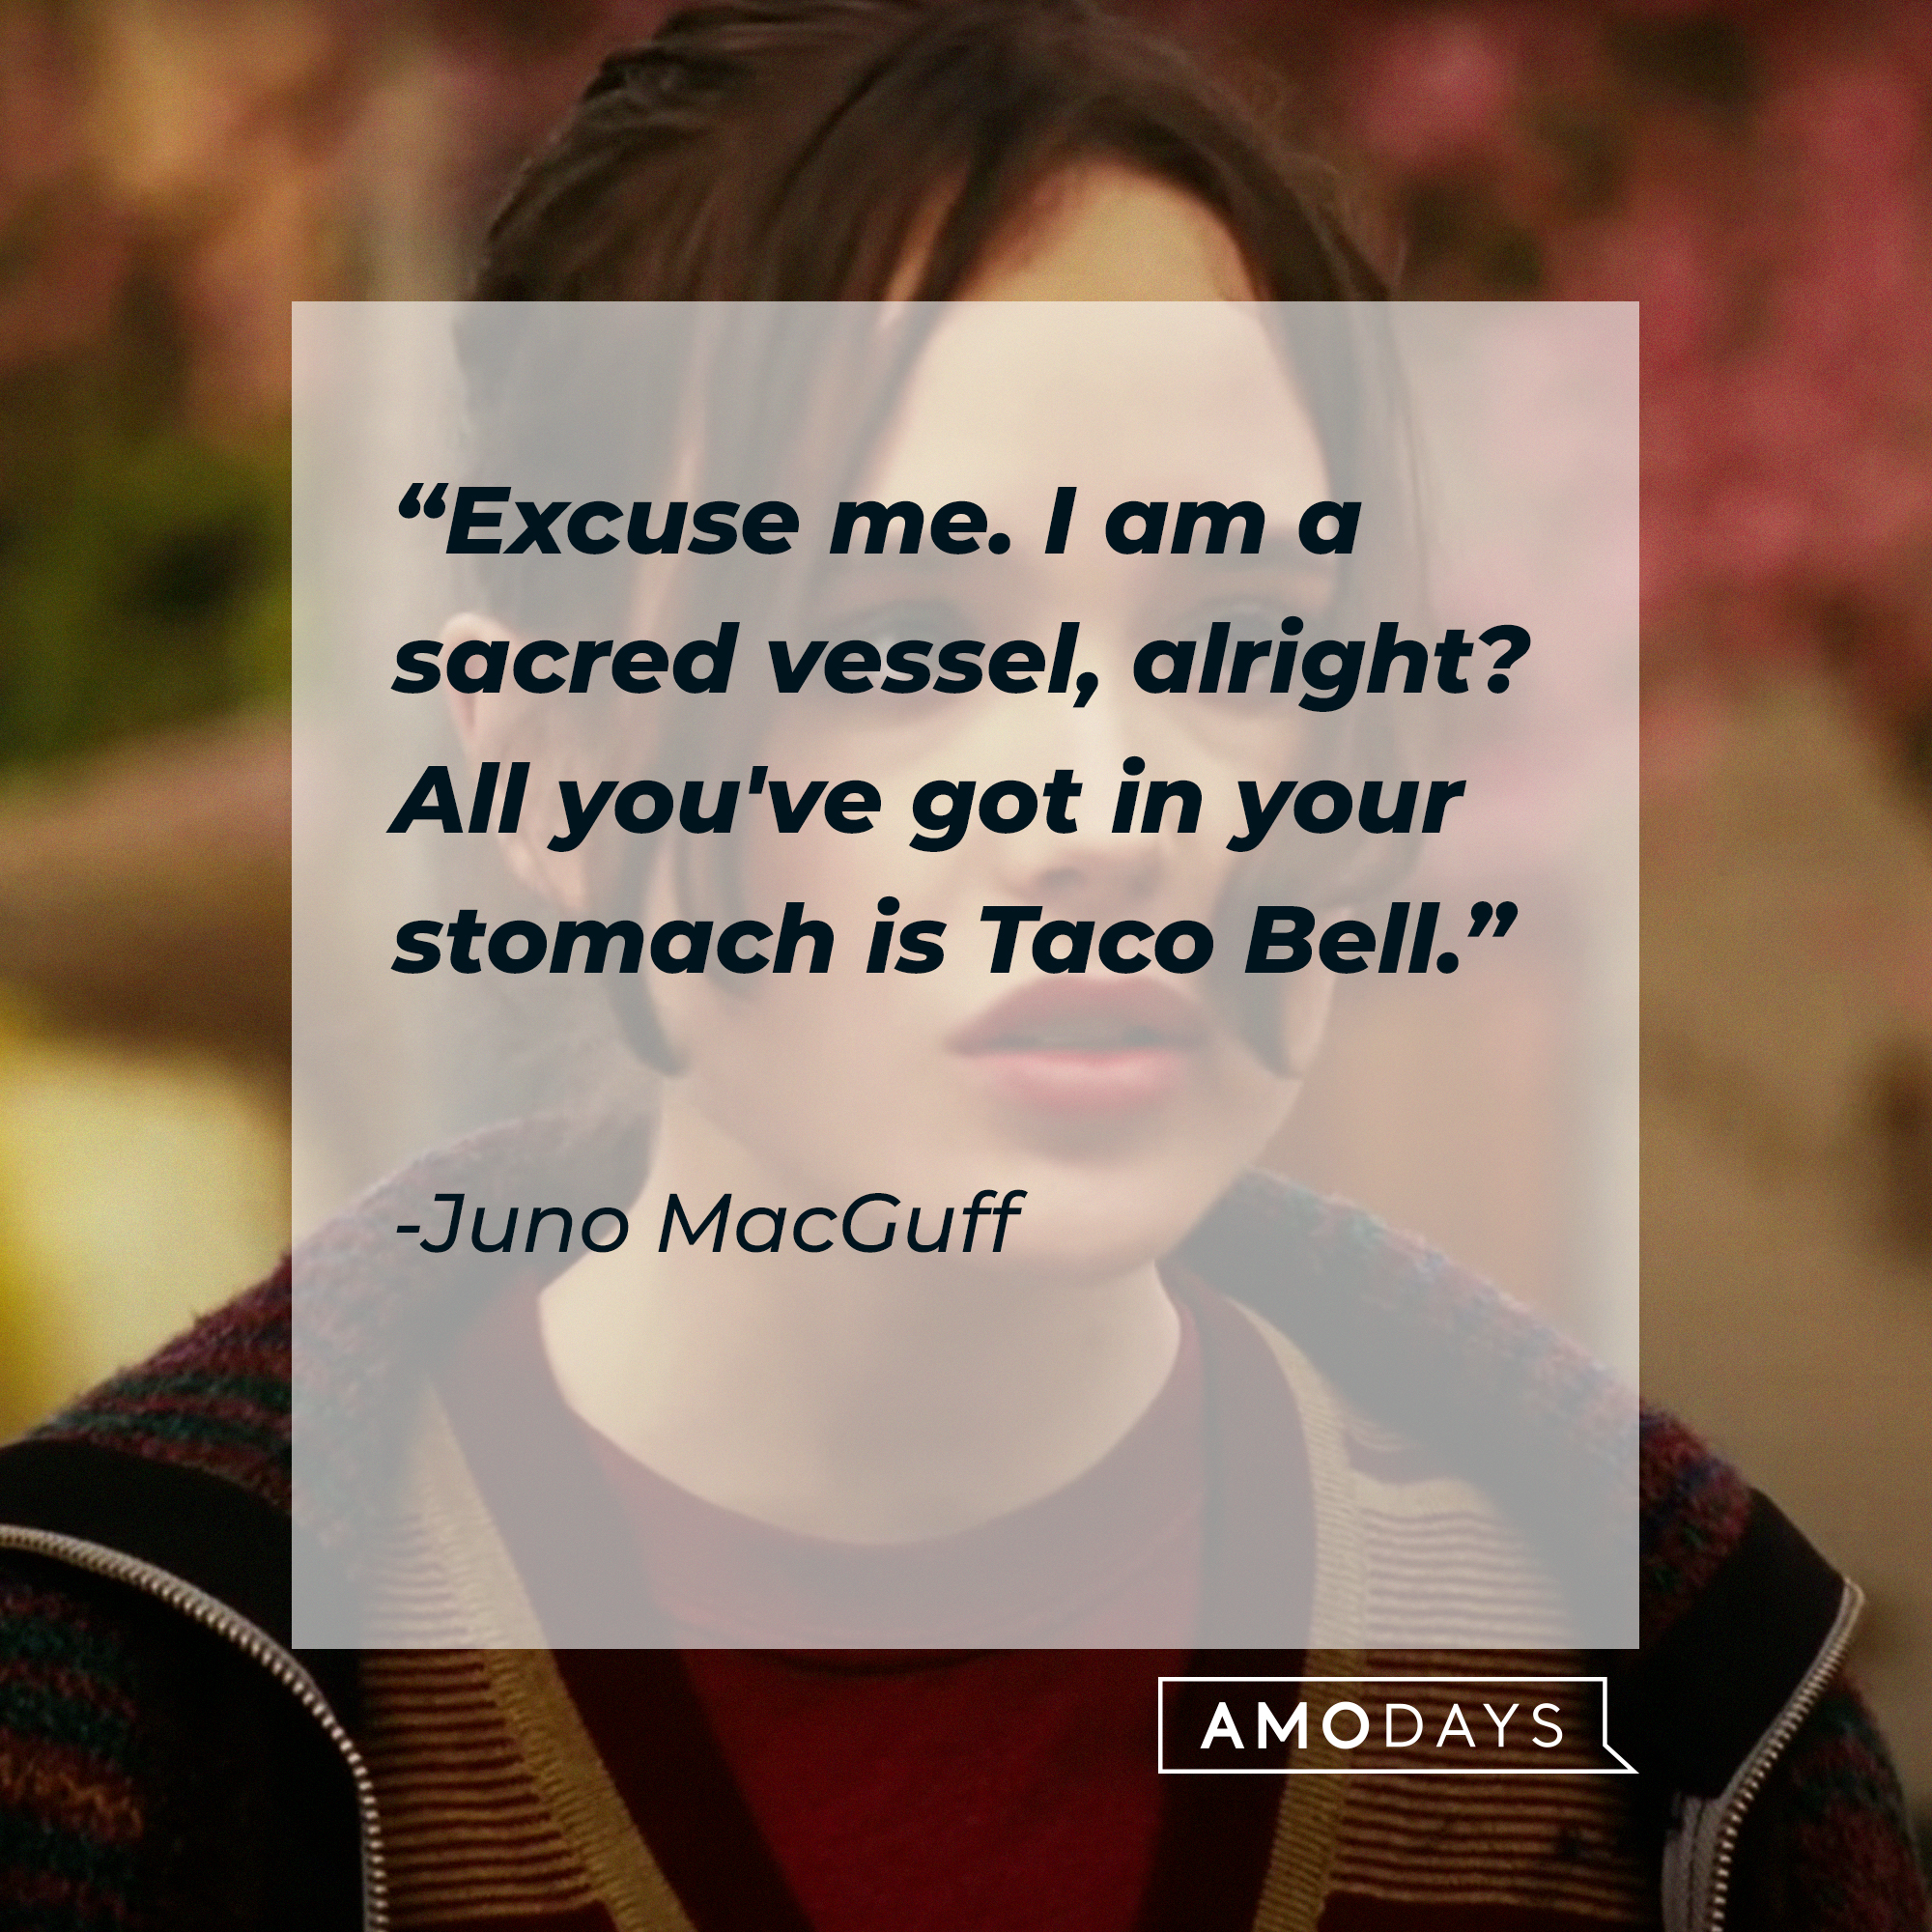 Juno MacGuff, with her quote: “Excuse me. I am a sacred vessel, alright? All you've got in your stomach is Taco Bell.” | Source: Facebook.com/JunoTheMovie